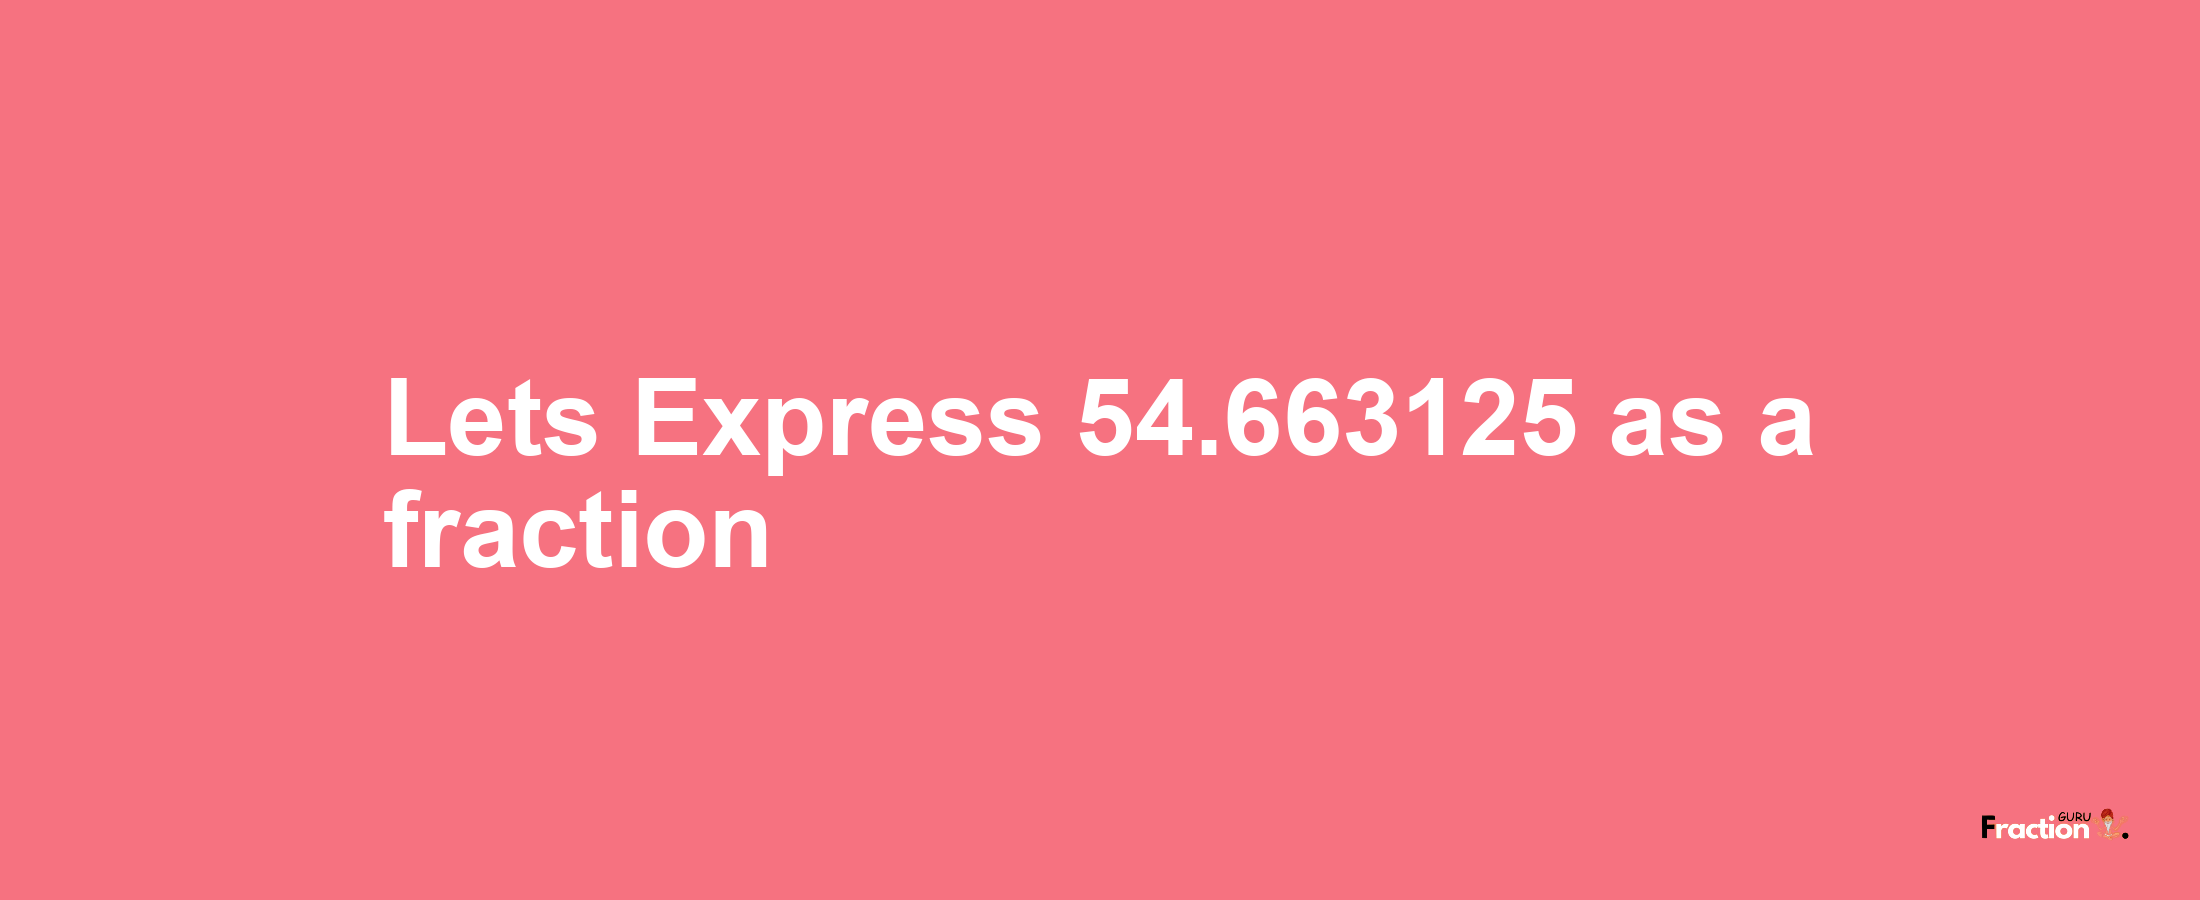 Lets Express 54.663125 as afraction